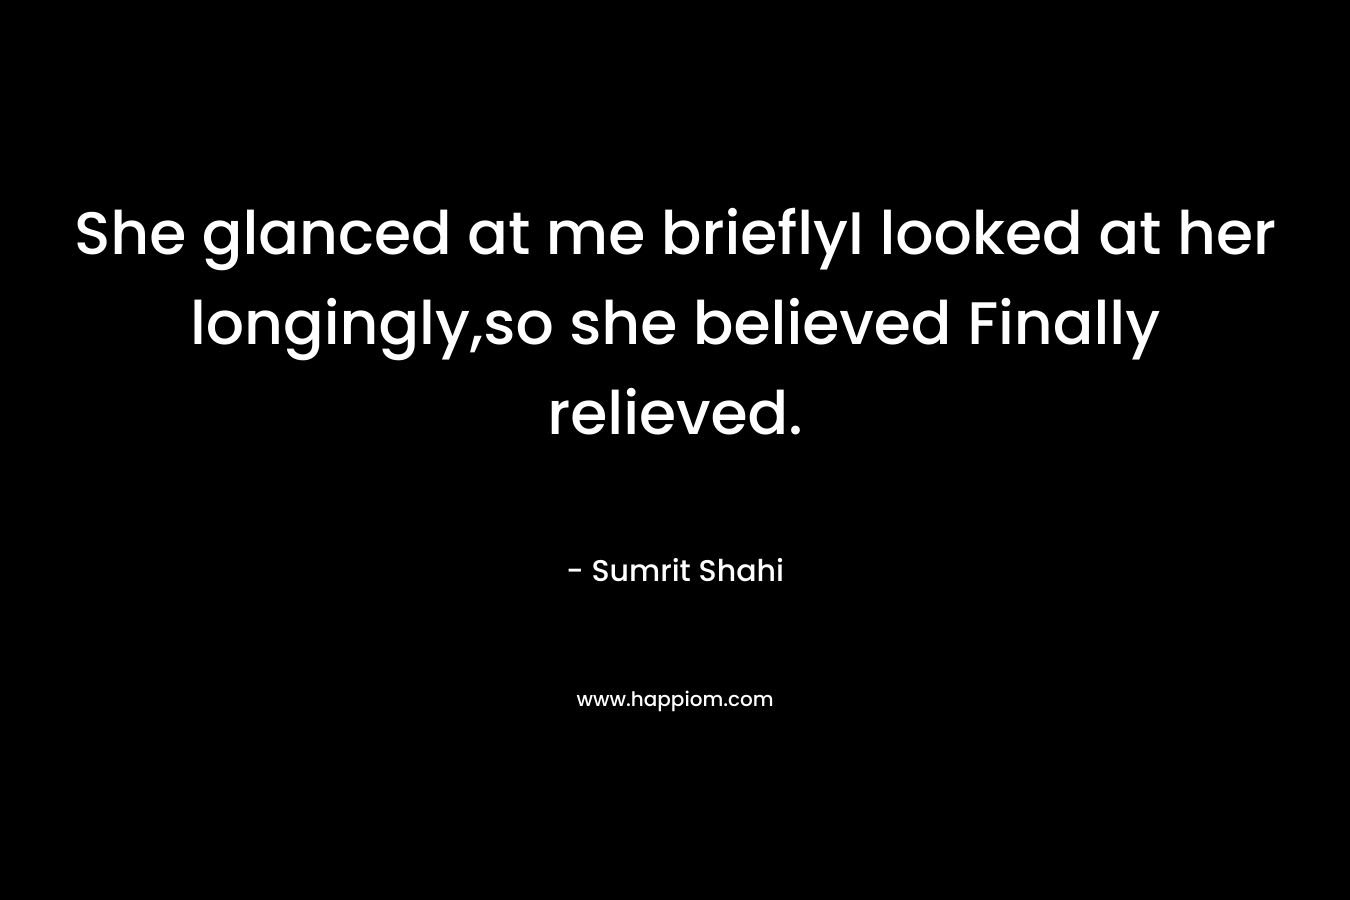 She glanced at me brieflyI looked at her longingly,so she believed Finally relieved. – Sumrit Shahi